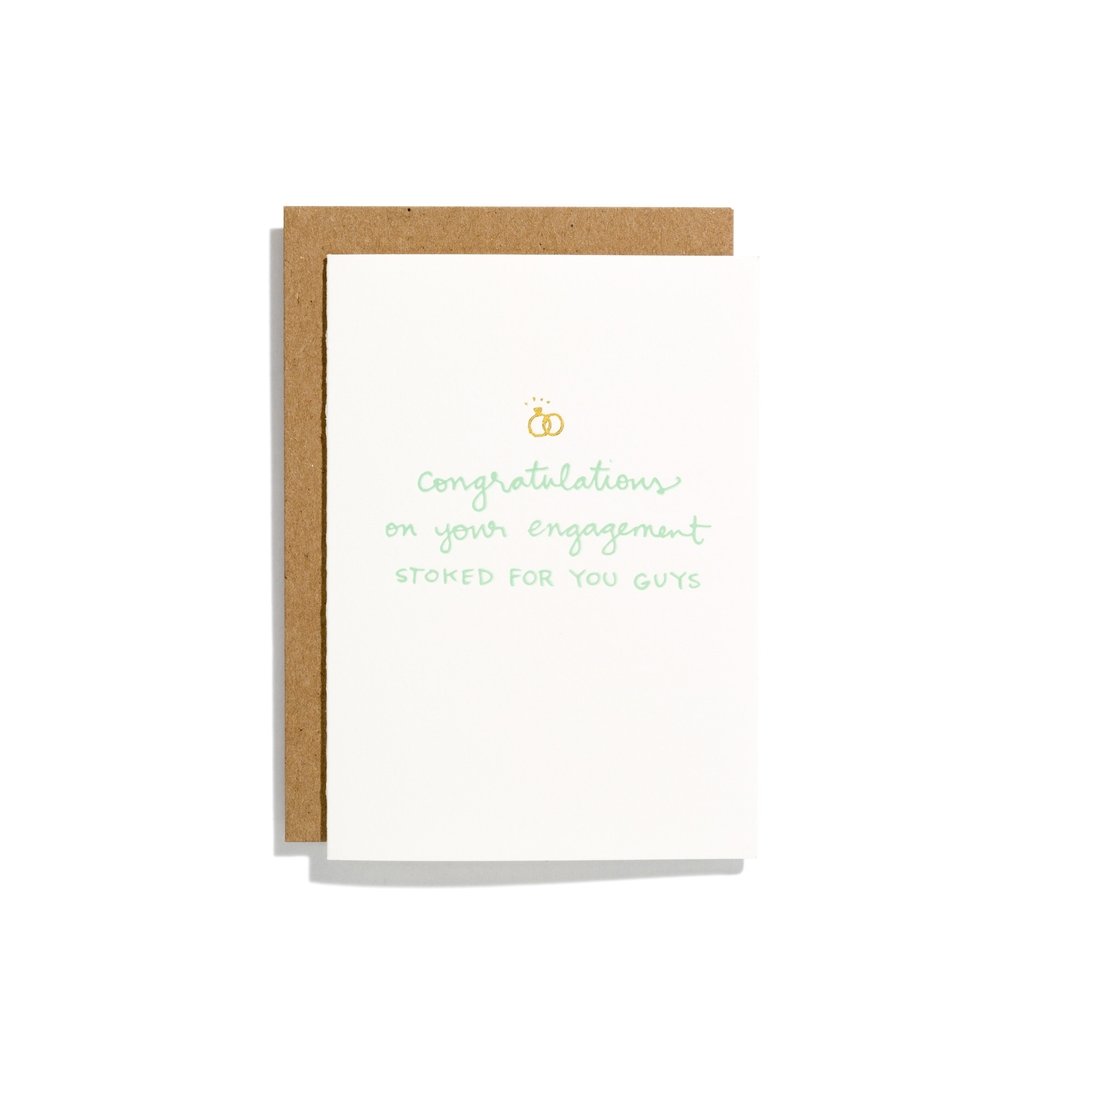 Image of Stoked for You Engagement Card